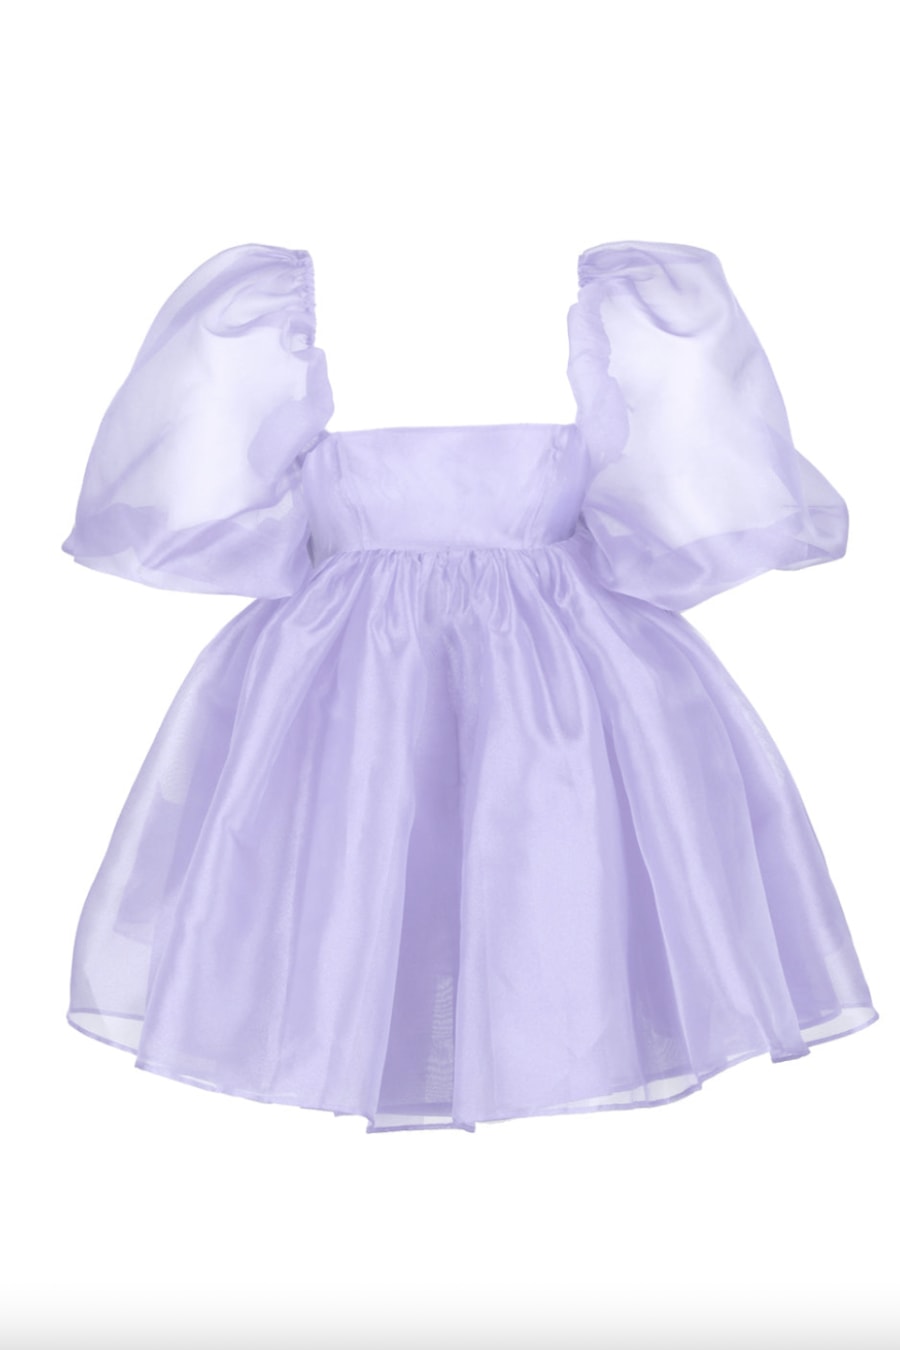 Rent Puff Dress in Lilac - Selkie | John Lewis